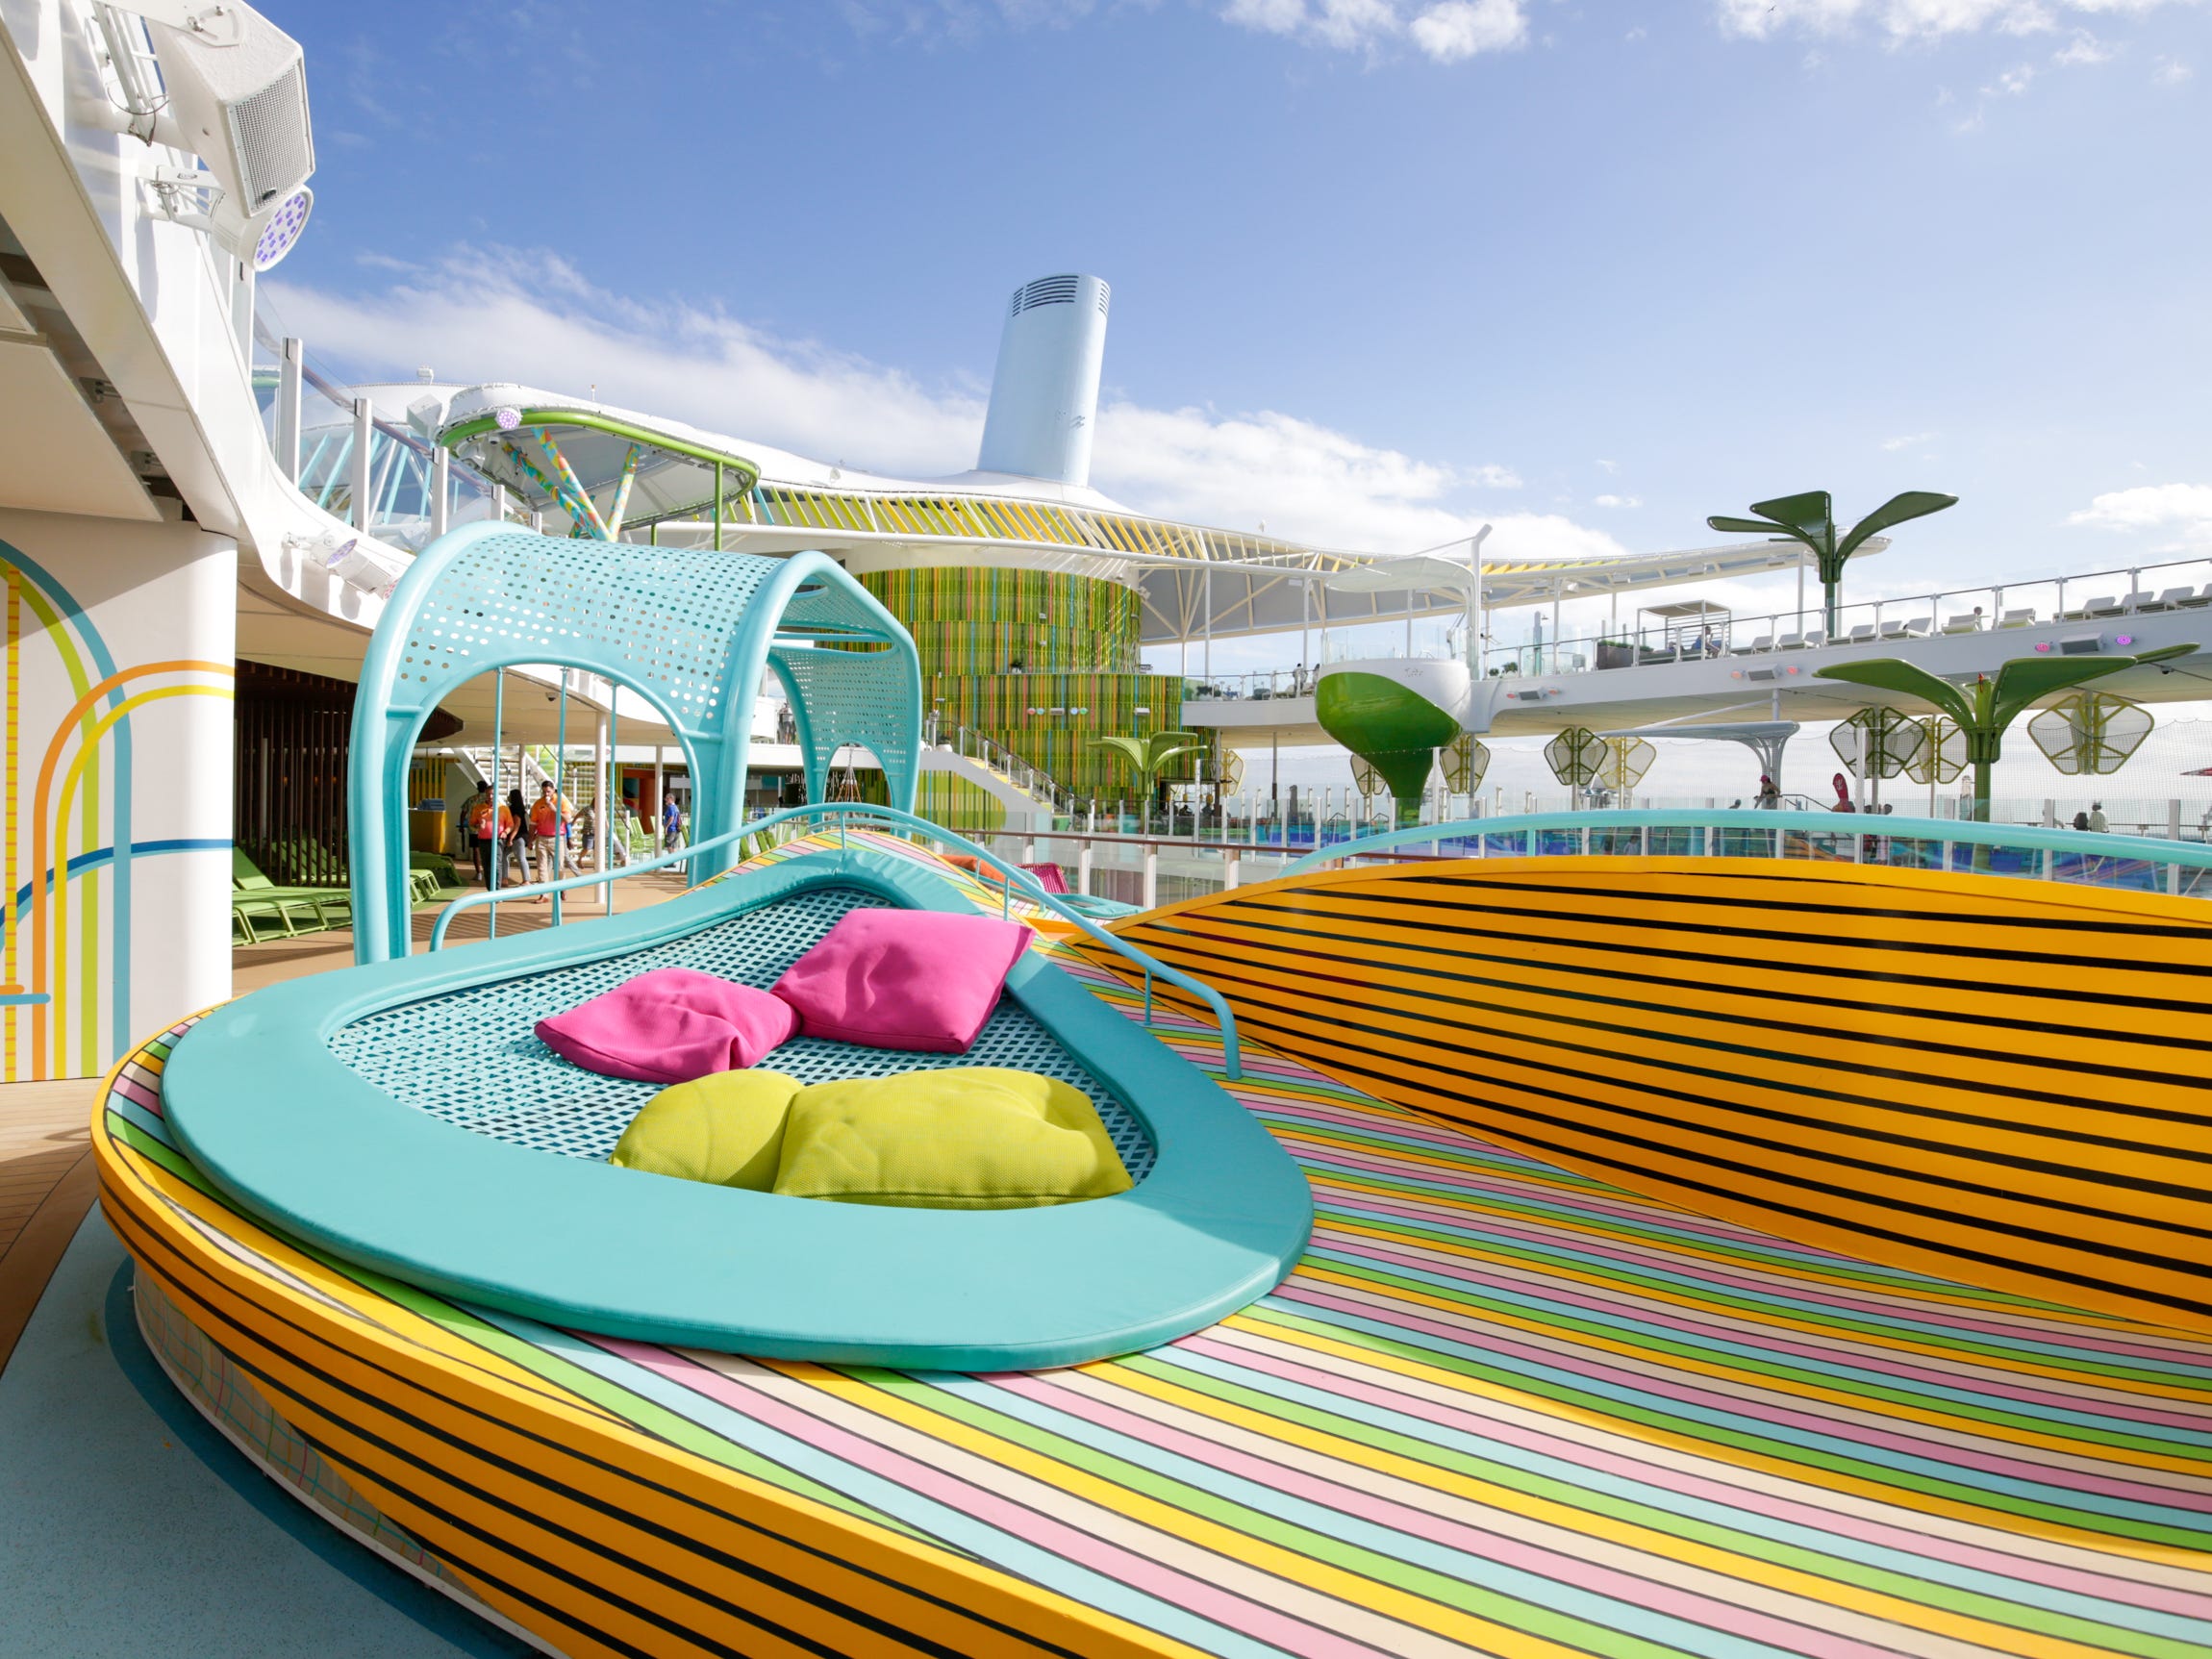 <p>The cruise line invited me on Icon's complimentary preview cruise in late January, a week before its official debut.</p><p>During my three nights at sea, I saw the cruise company's CEO's claims of "Instagrammable elements" almost everywhere I looked.</p>